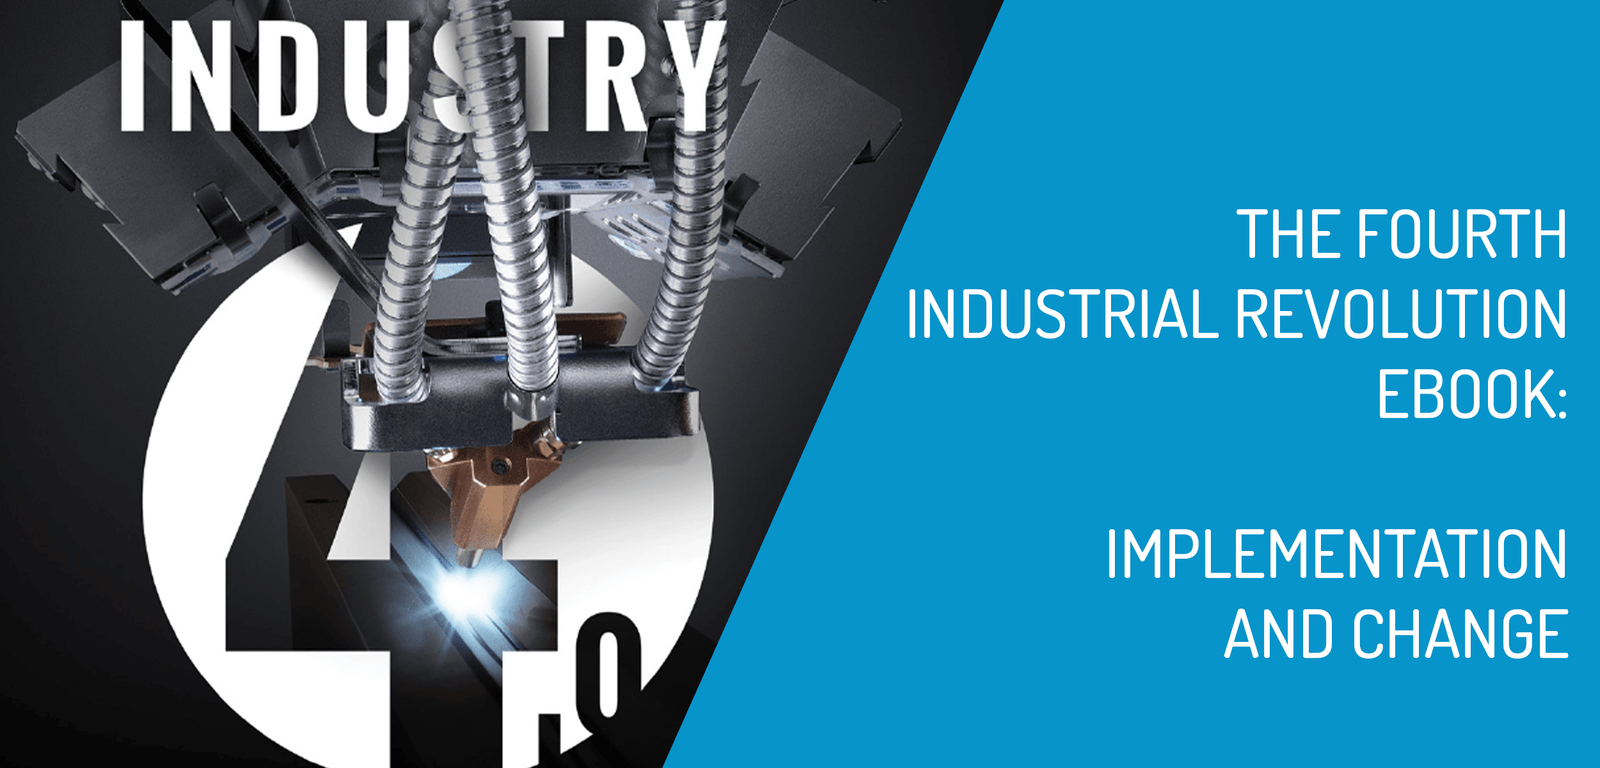 The Fourth Industrial Revolution Ebook: Implementation and Change (Industry 4.0).